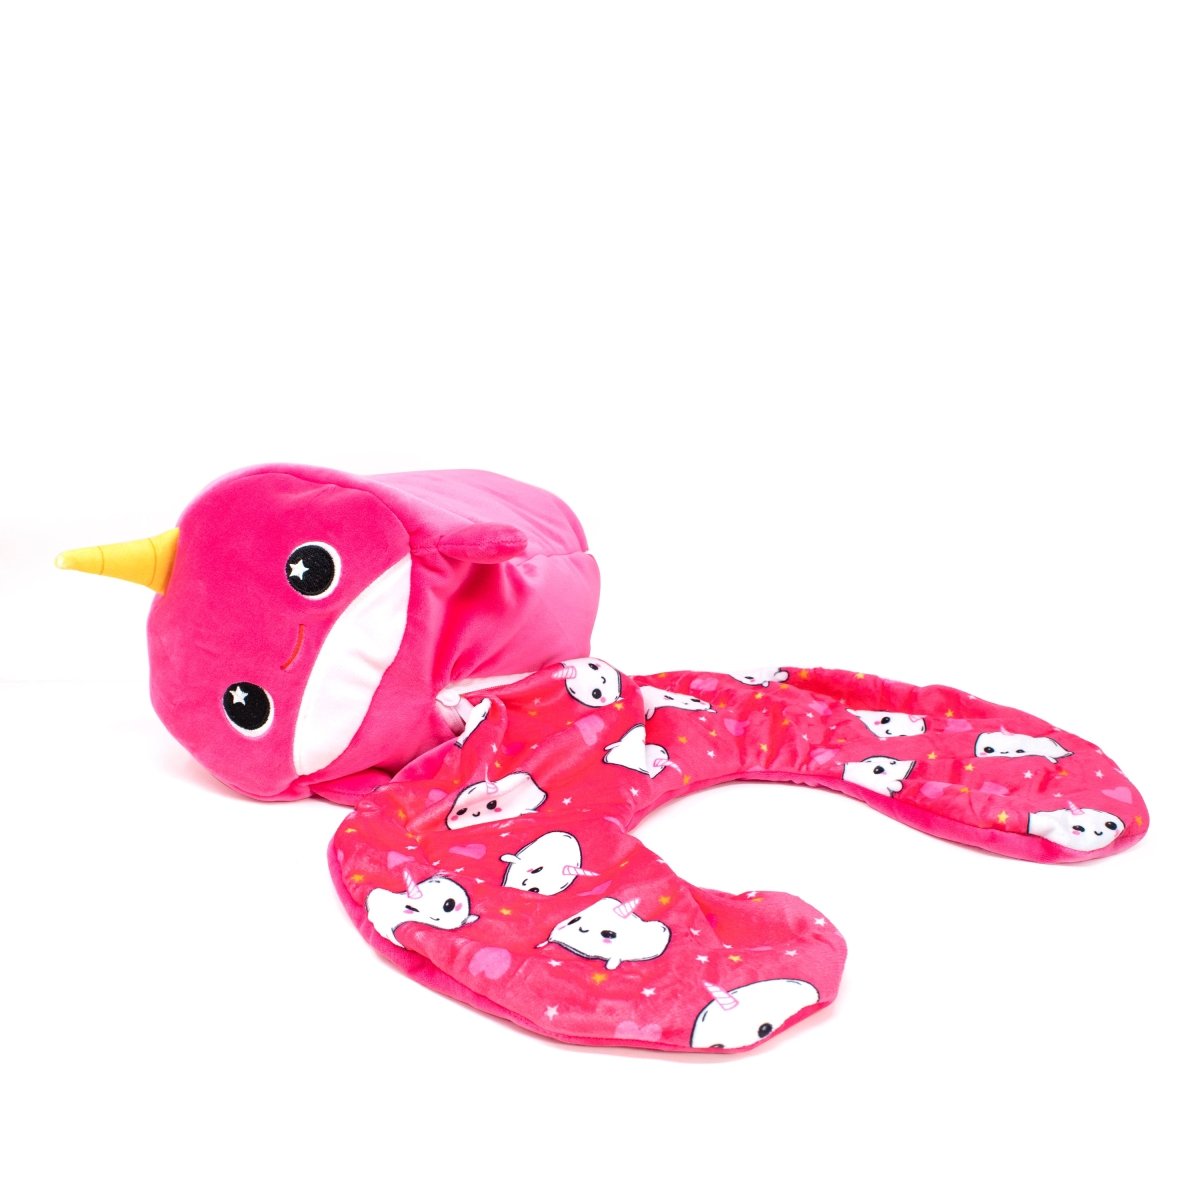 Bubblegum the Narwhal 2-In-1 Travel Pillow